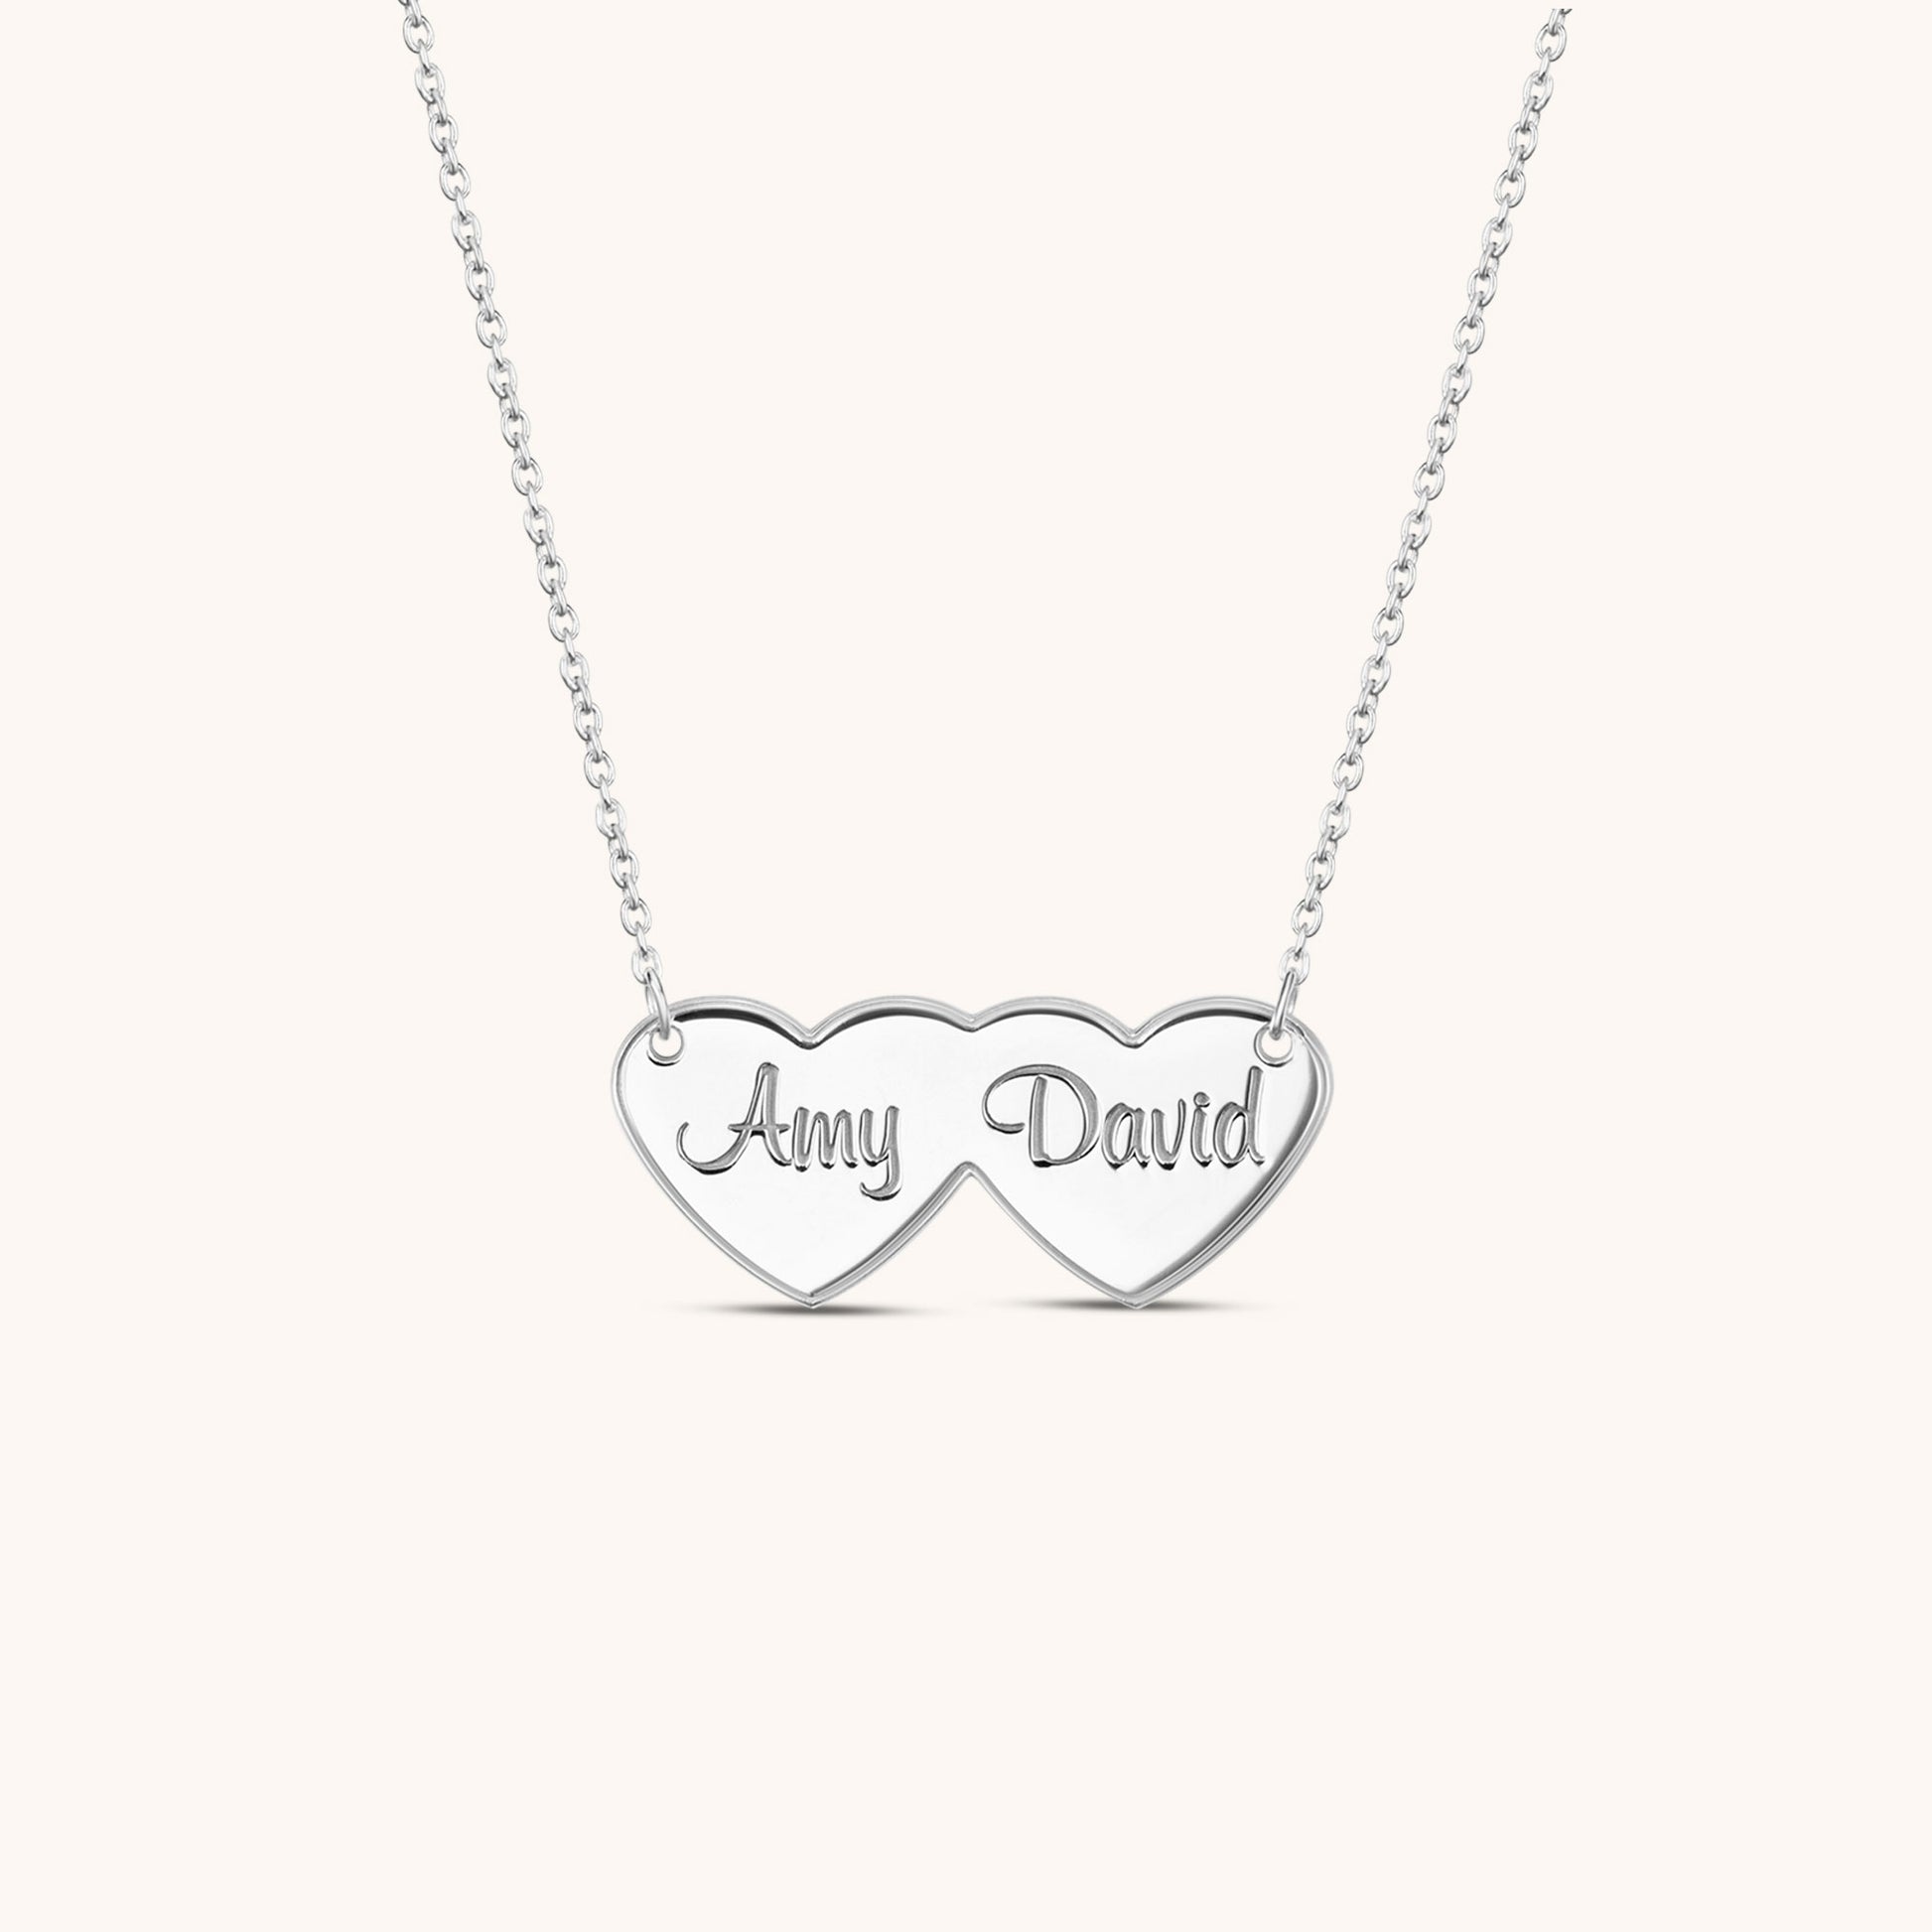 Personalized Double Heart Two Name Necklace - Keepsakes